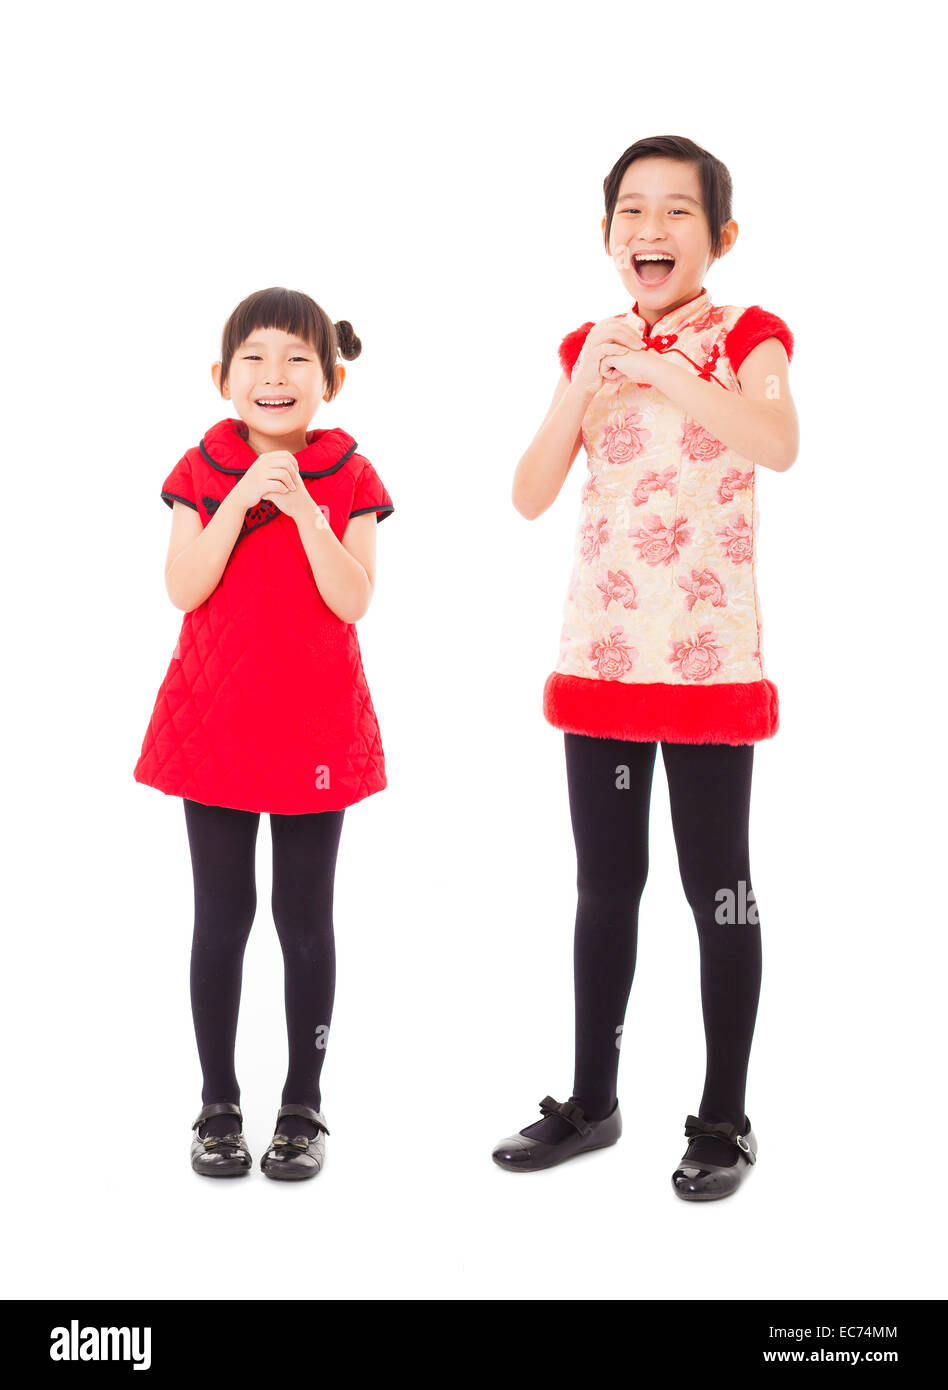 happy chinese new year. smiling little girls with congratulation gesture Stock Photo